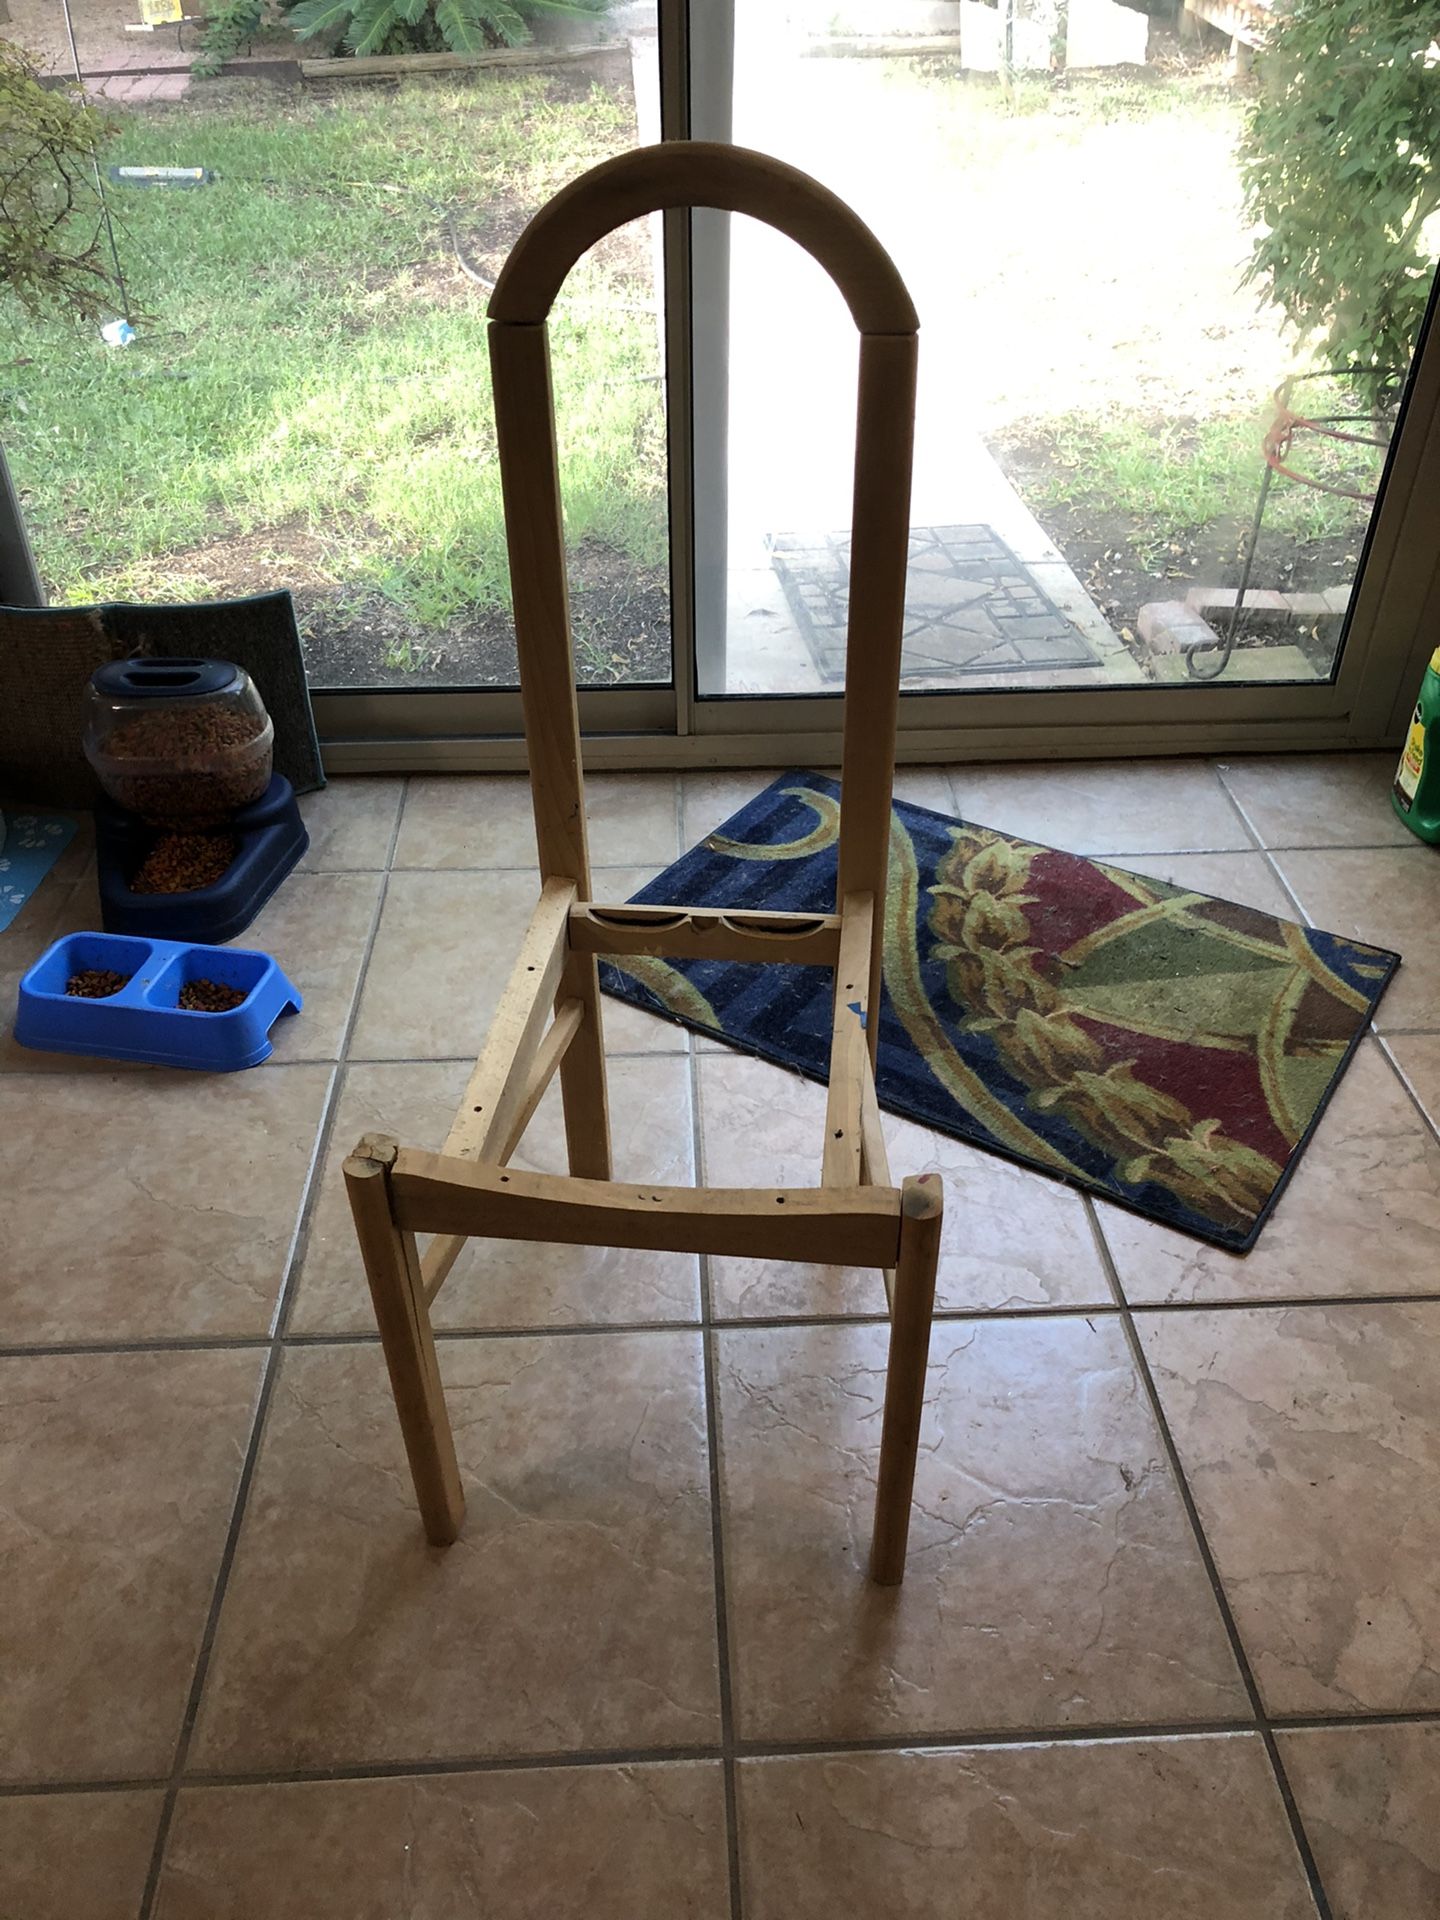 Free porch pickup - Wood frame for a chair